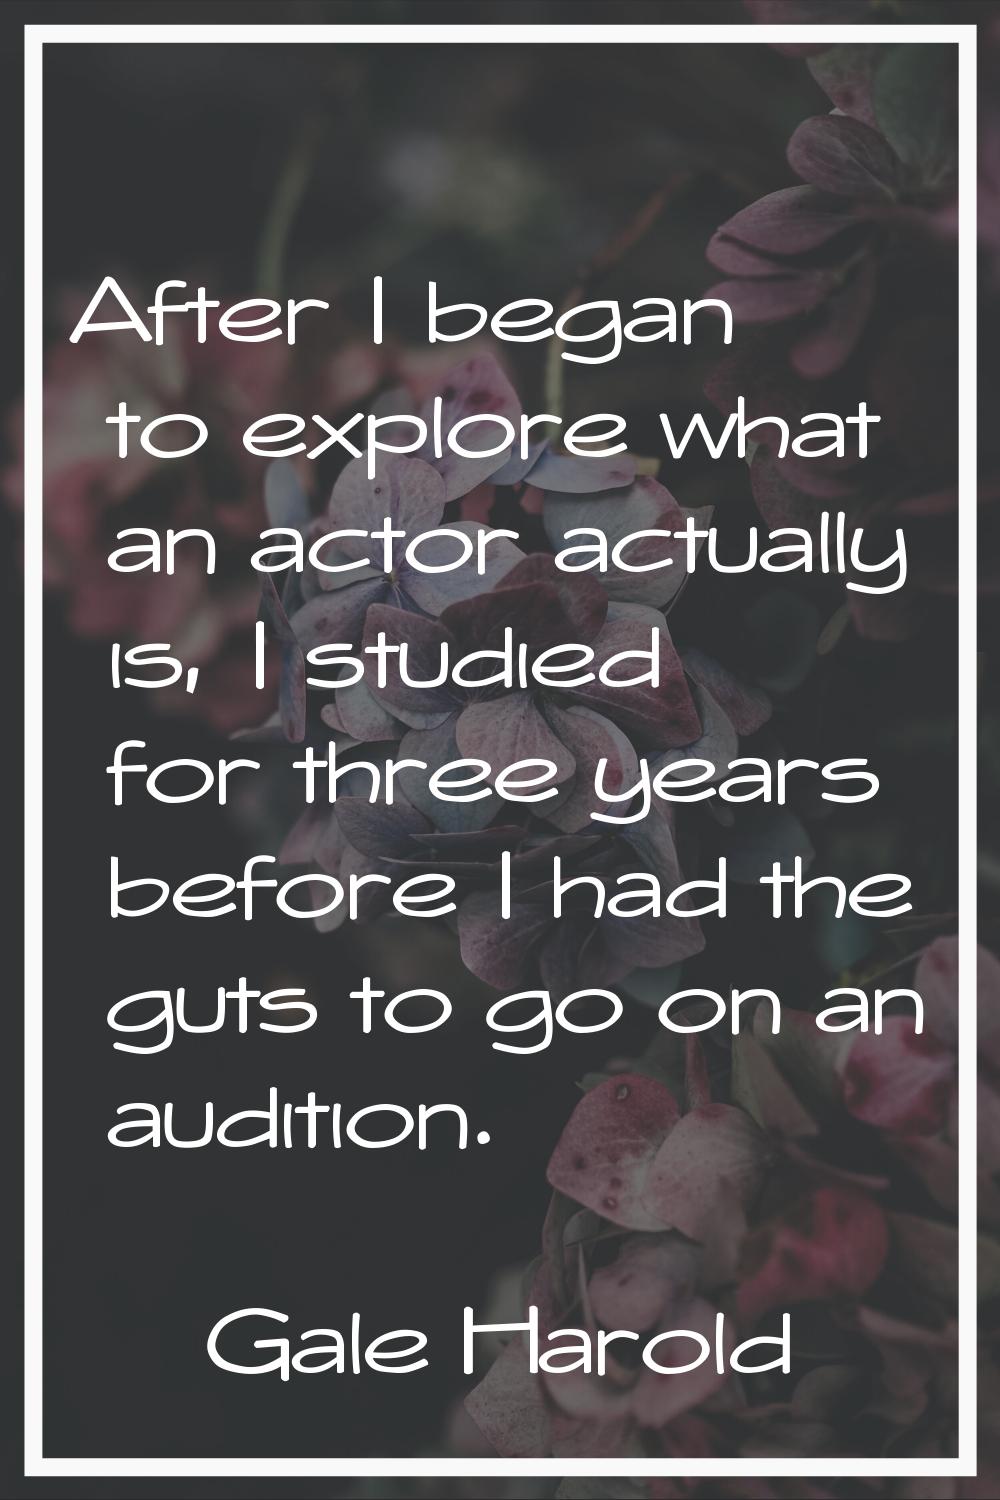 After I began to explore what an actor actually is, I studied for three years before I had the guts